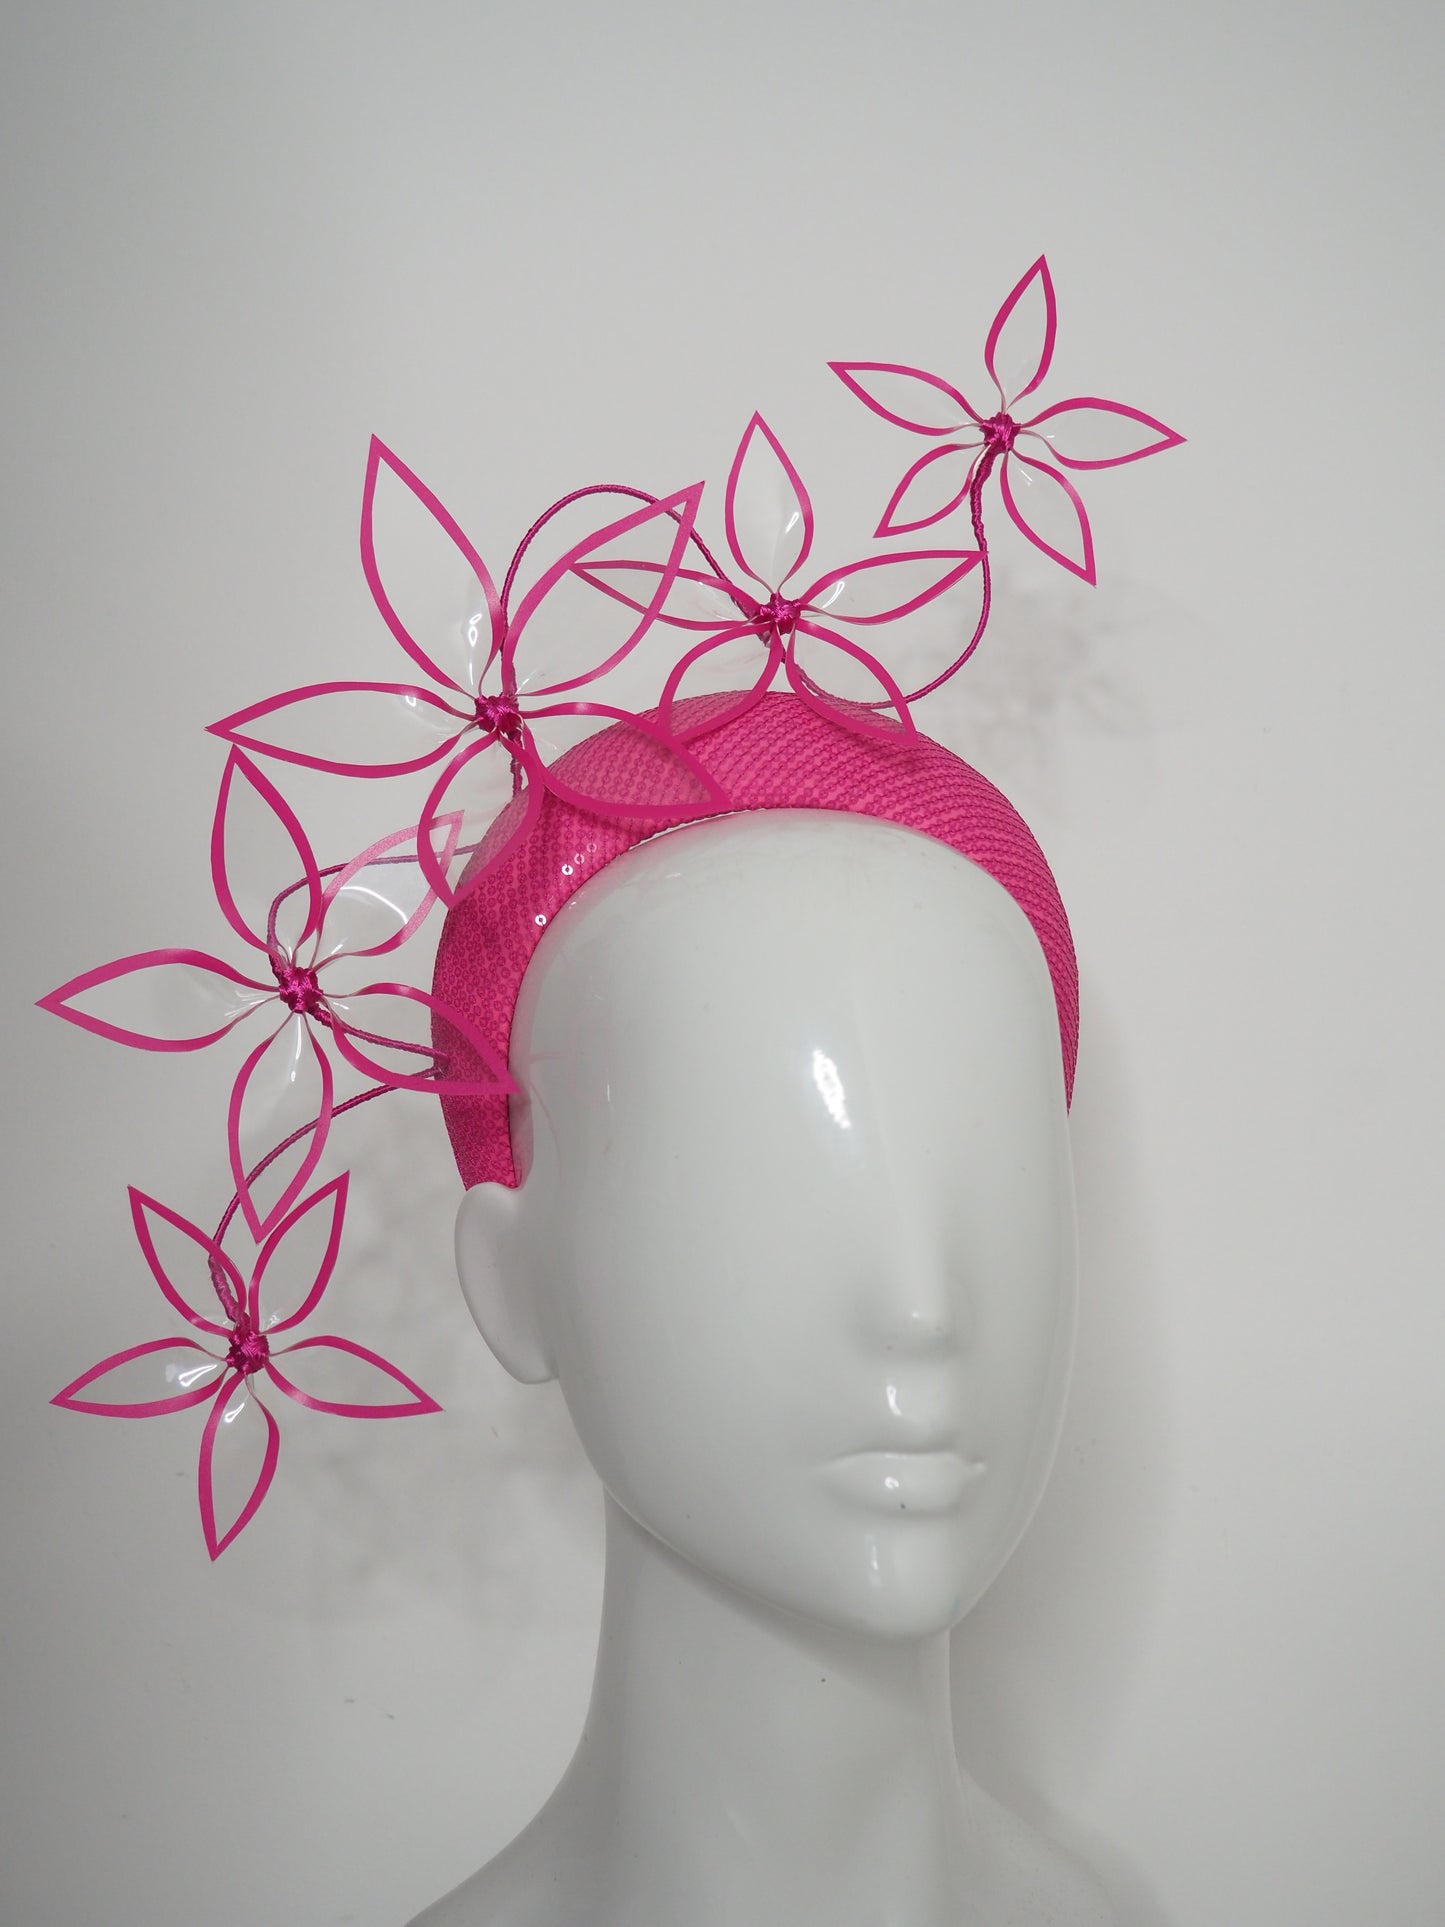 Hot Pink Pop - Hand Dyed Hot Pink sequin 3d headband with dancing crystoform flowers